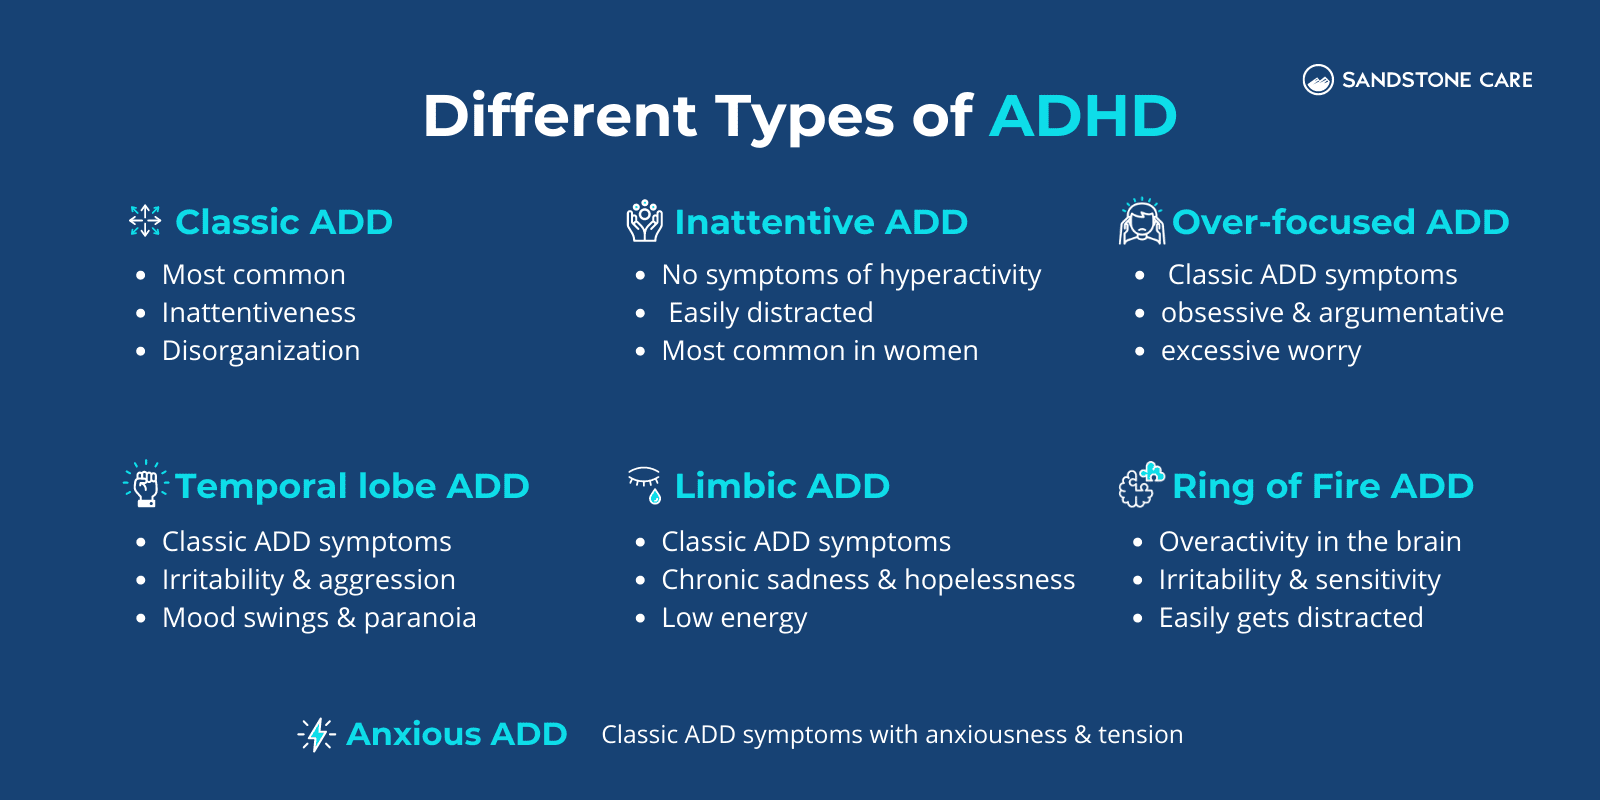 7 Types Of ADHD illustrated with relevant icons with 2 highlights of its symptoms and features